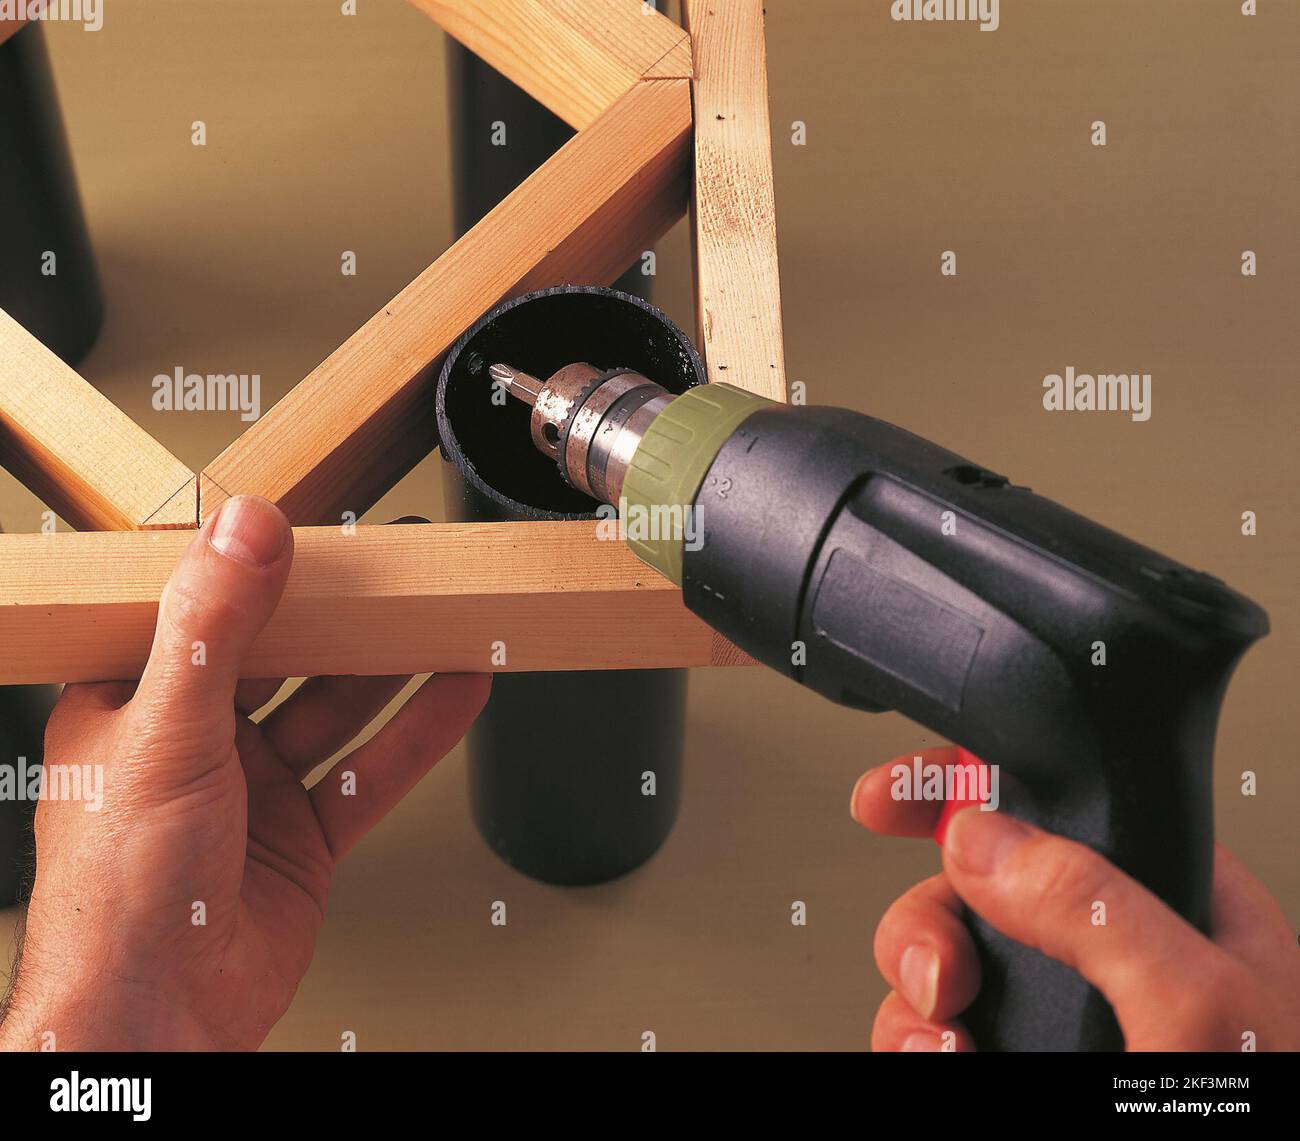 Drilling a screwing a tubular leg to an inner support strut Stock Photo